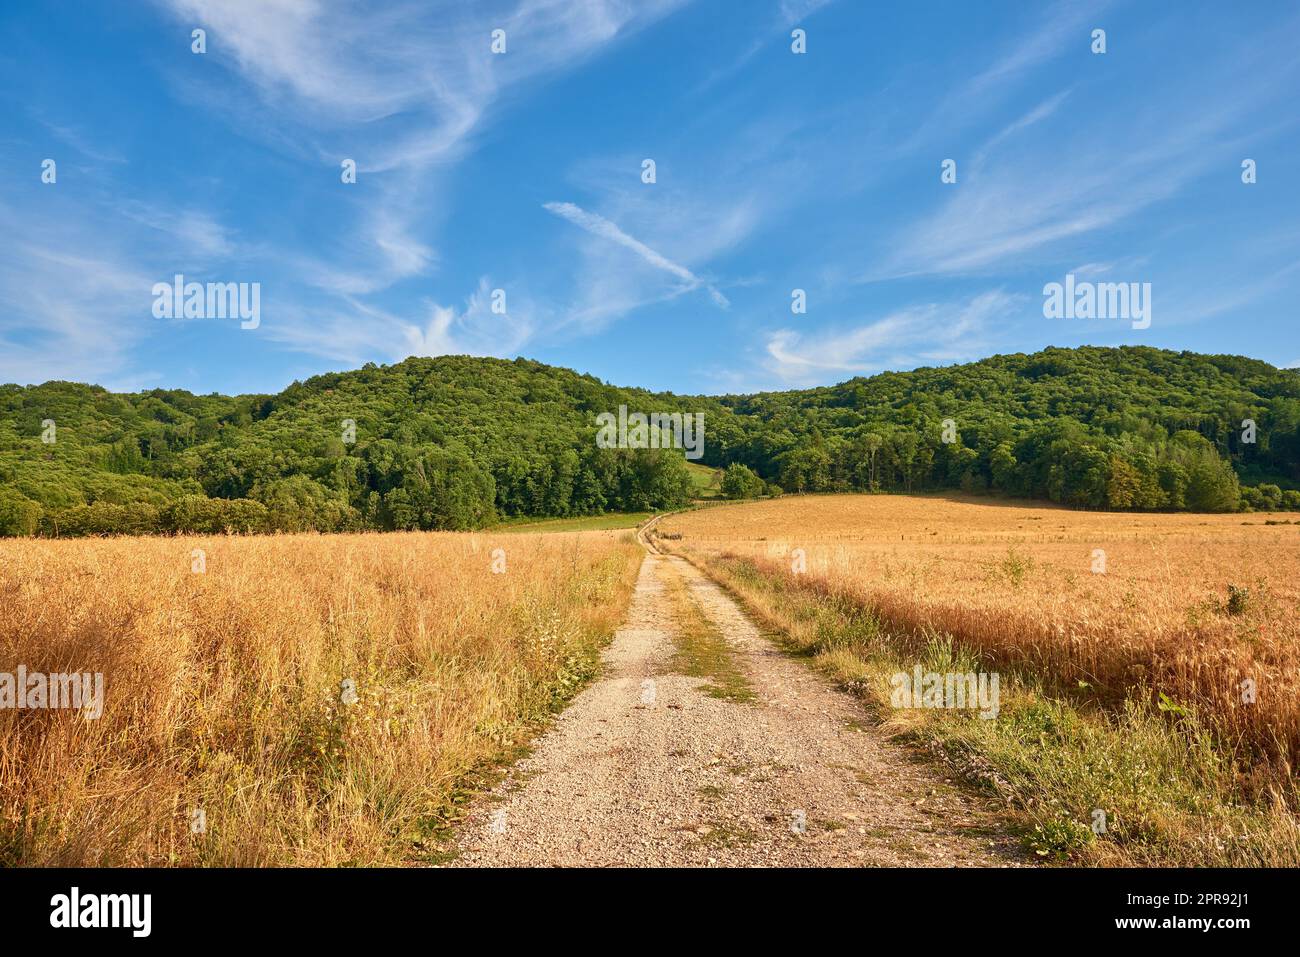 Dirt road through yellow farm land leading to dense green forest on a sunny day in France. Colorful nature landscape of rural wheat fields near quiet woodland with a stunning blue sky with copy space Stock Photo